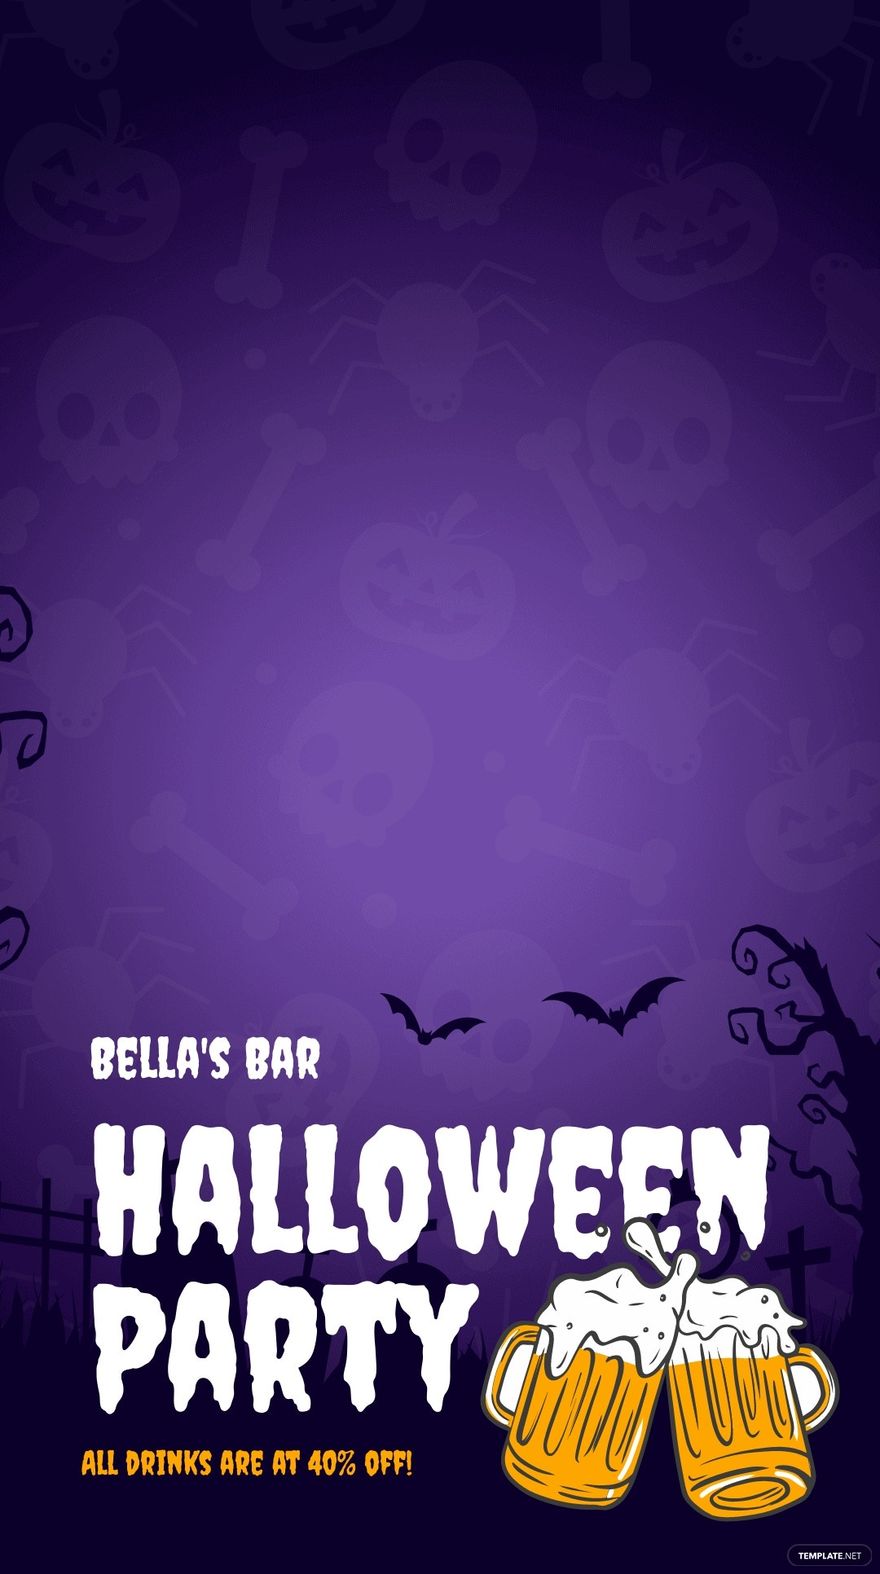 Halloween Party Snapchat Geofilter